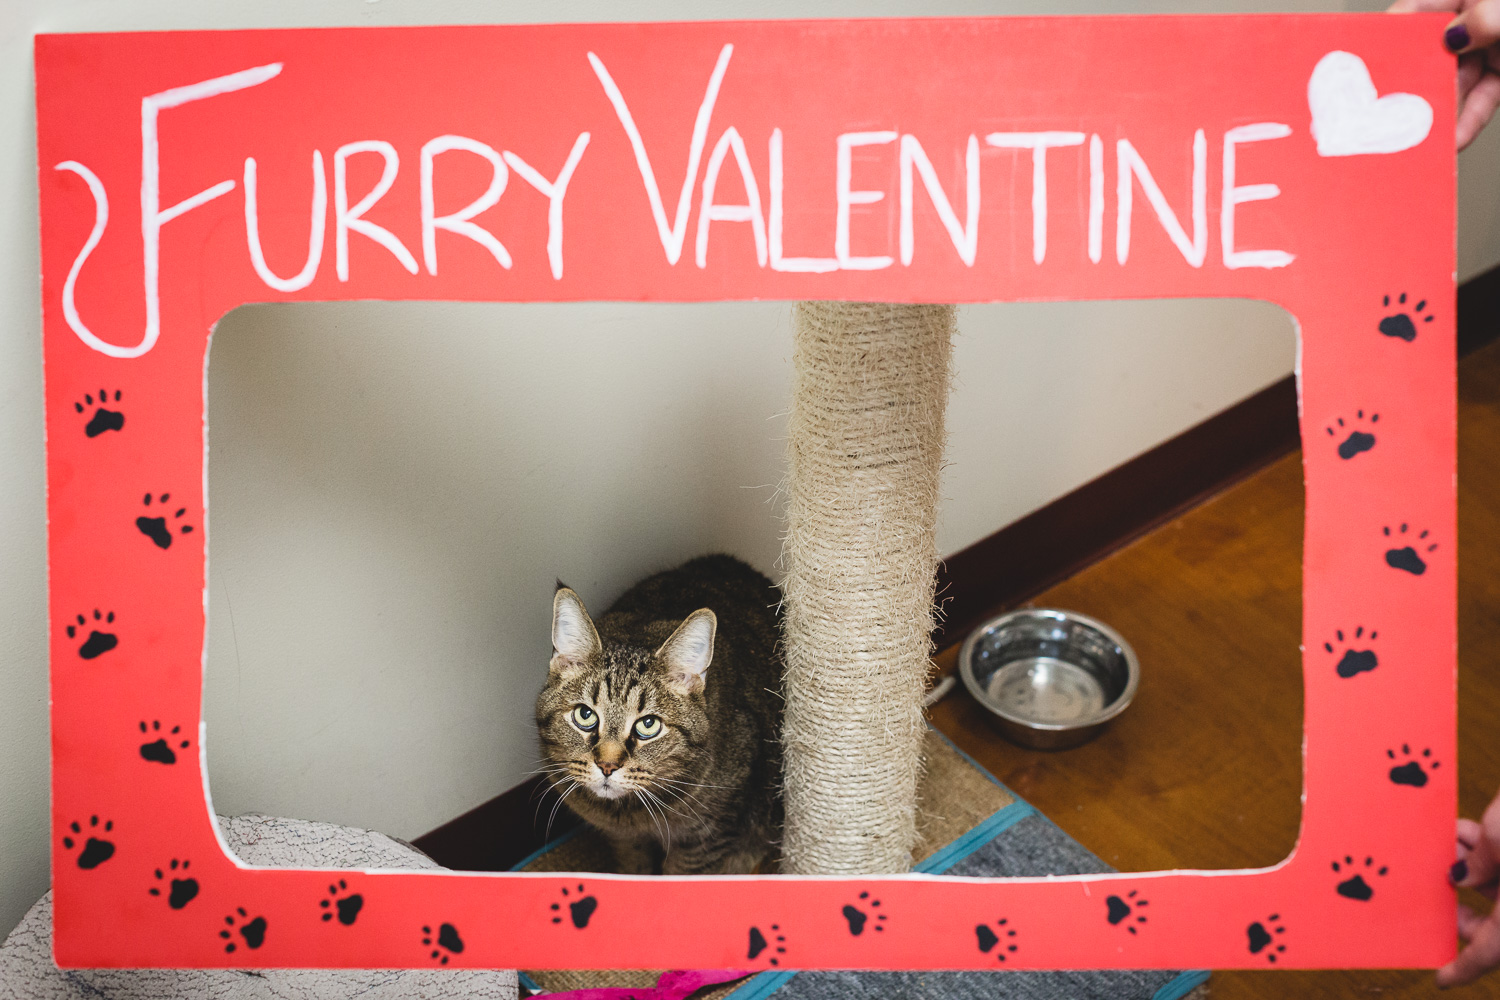 Furry Valentine Booth In Chicago